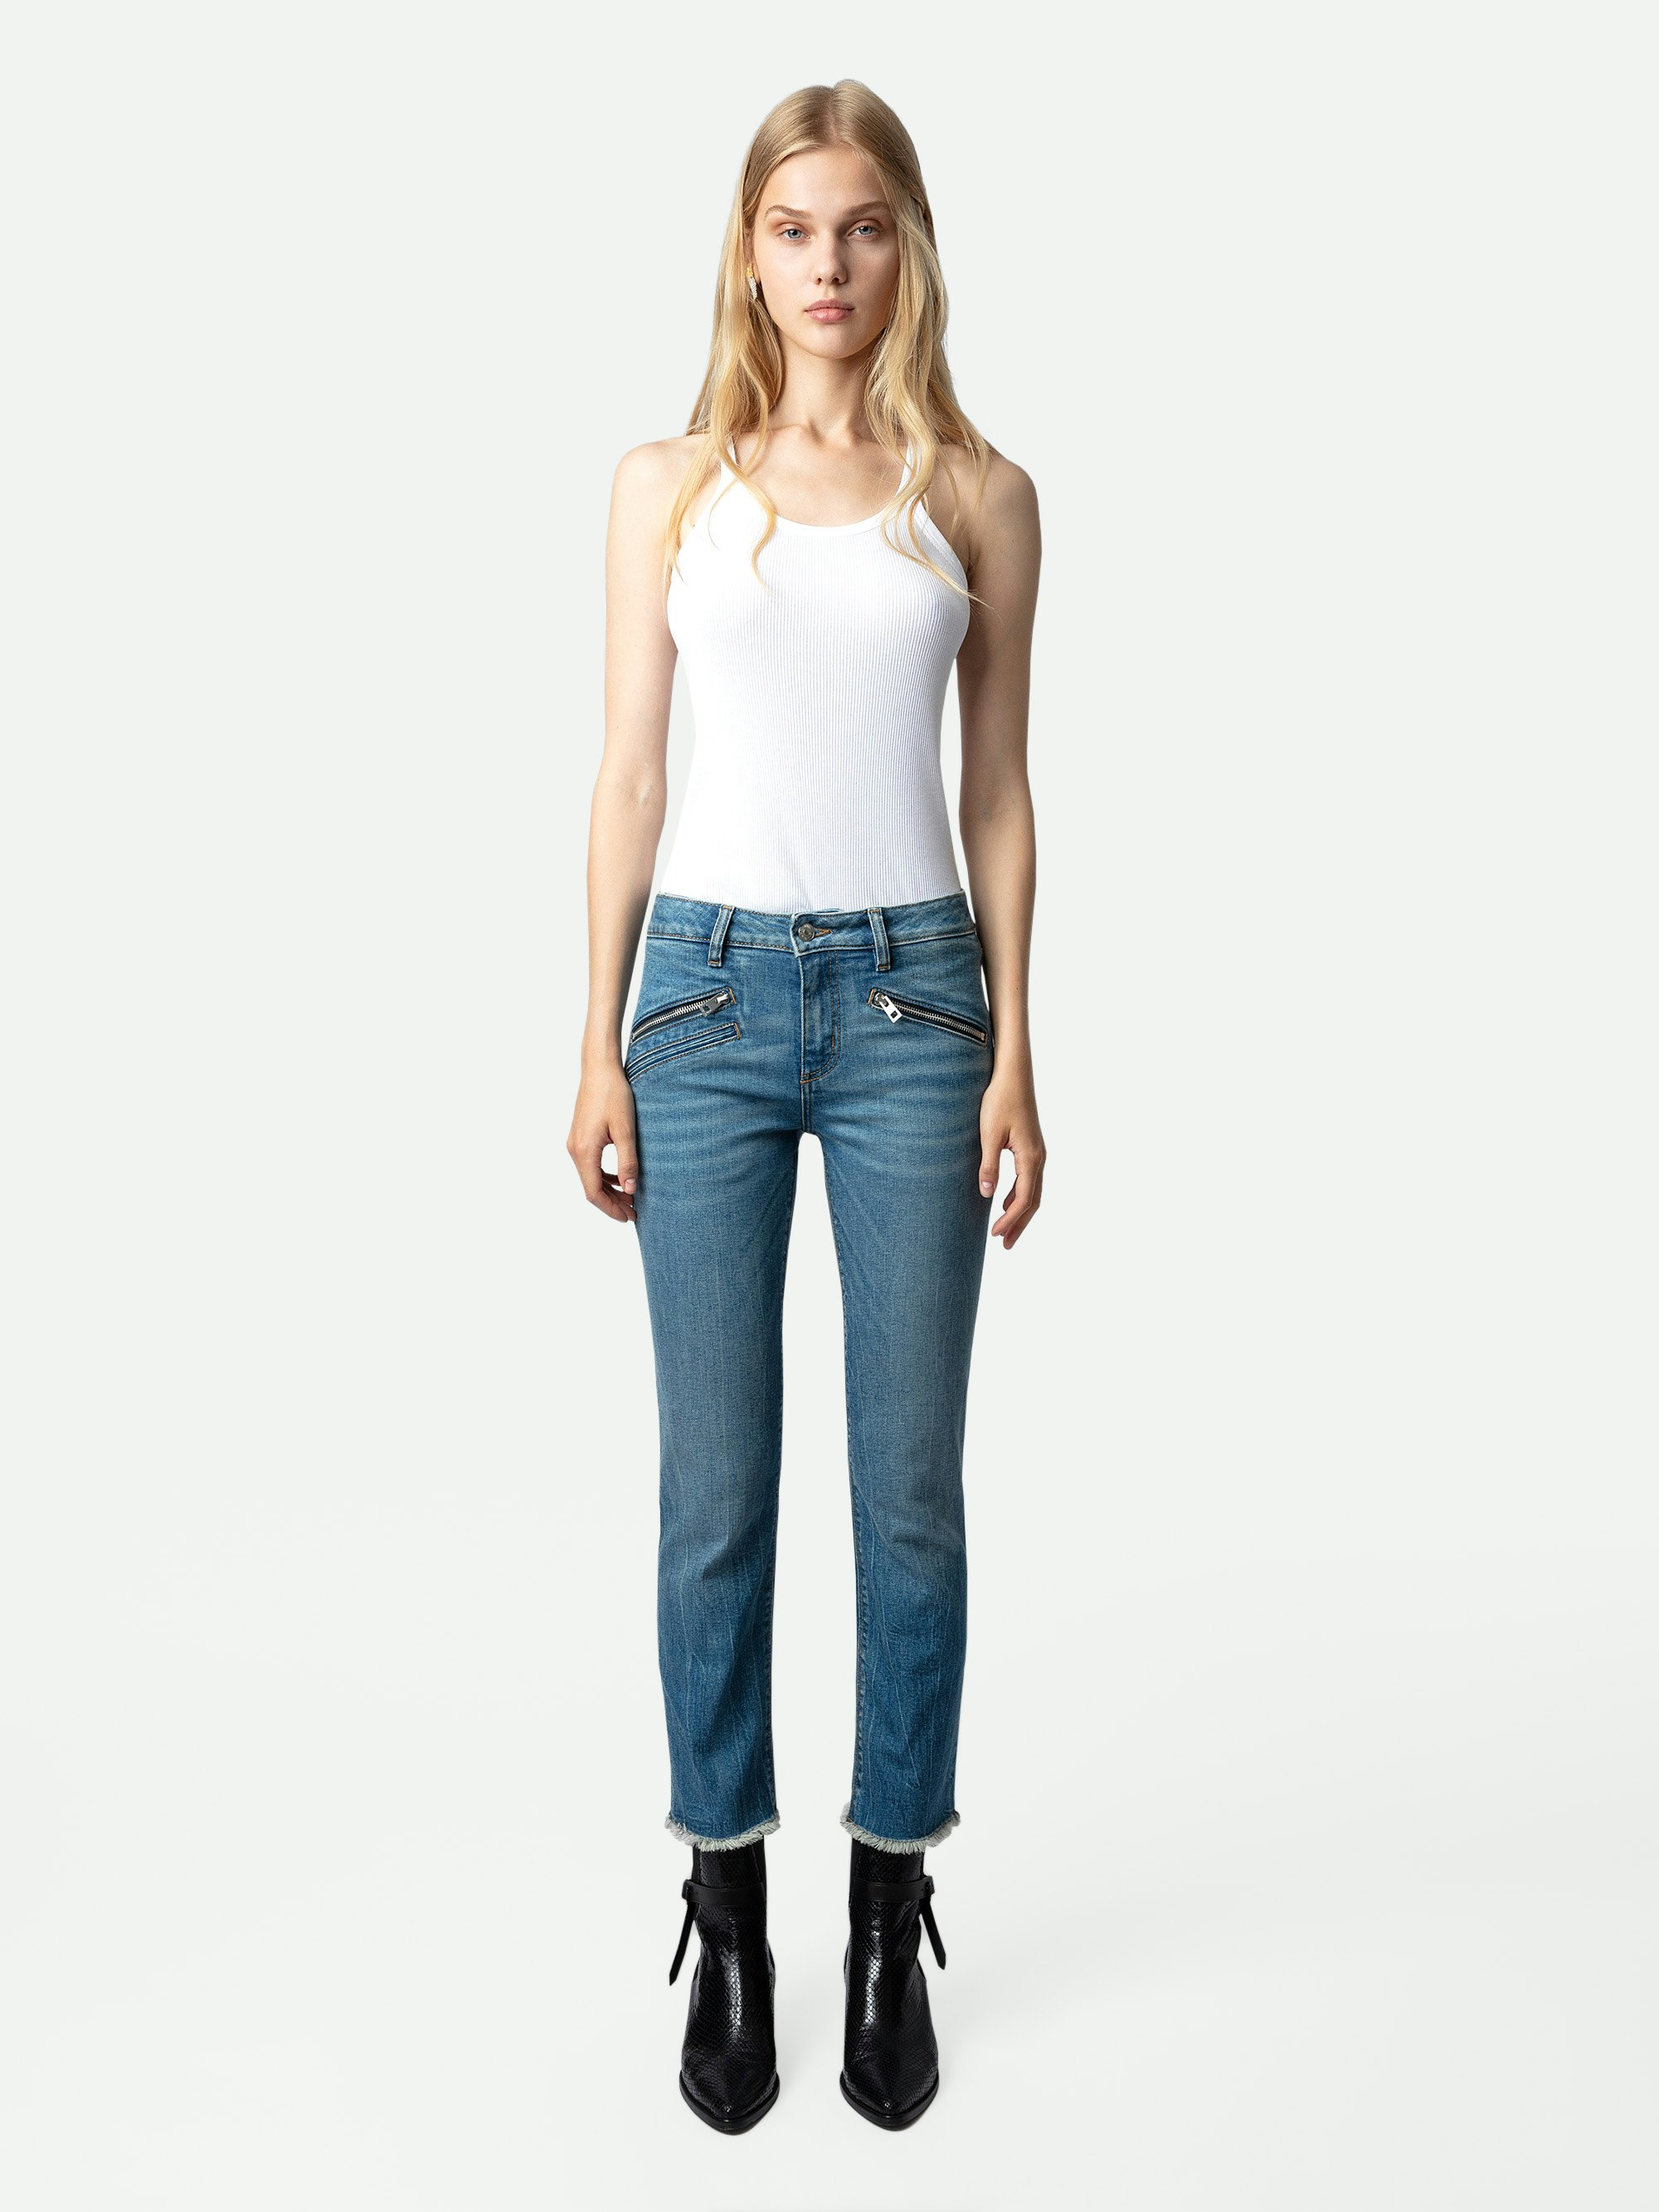 Ava Jeans - Women's blue washed slim jeans